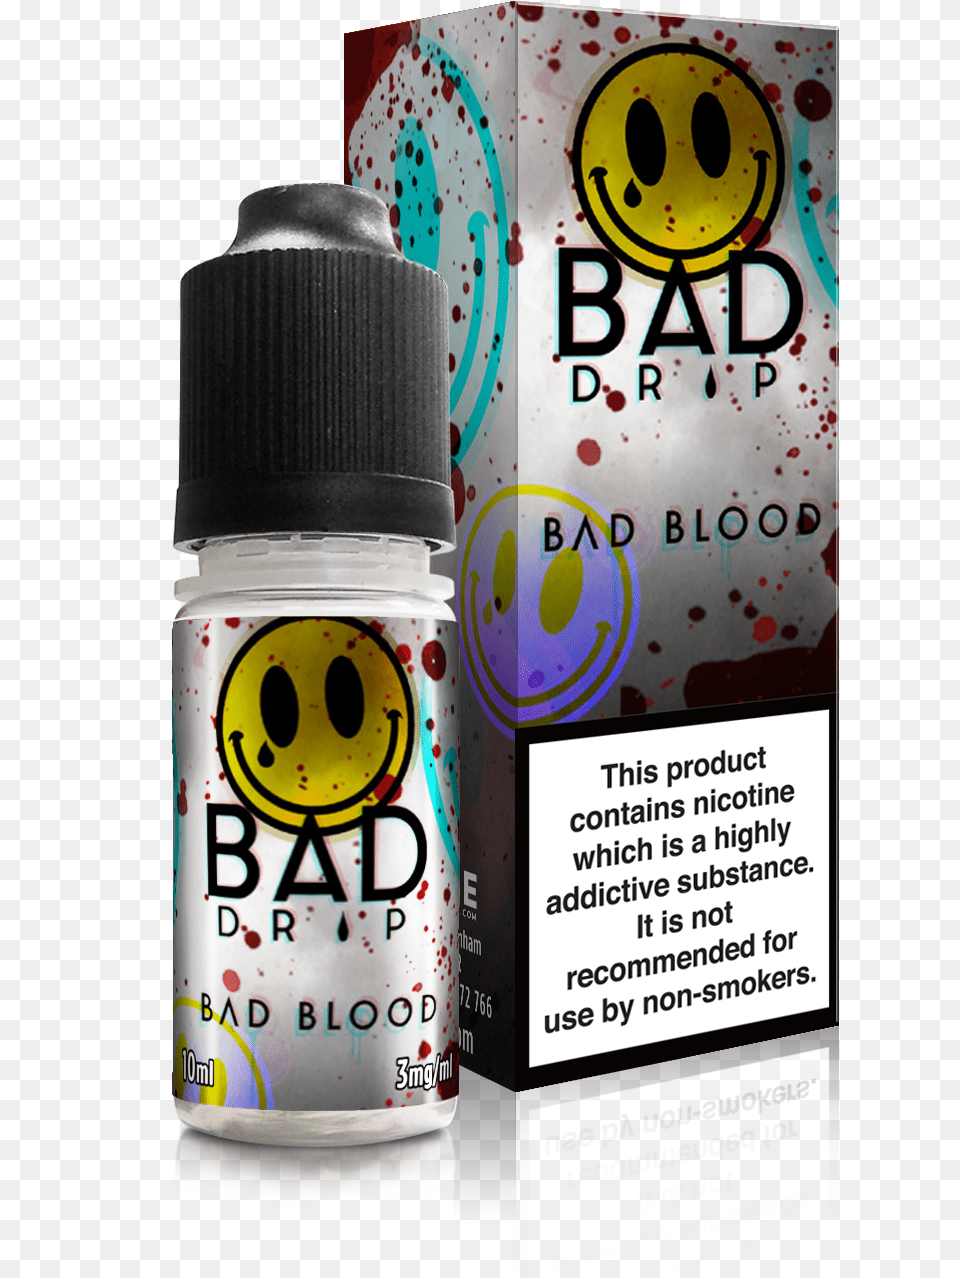 Bad Drip Eliquid Bad Blood Composition Of Electronic Cigarette Aerosol, Bottle, Can, Tin, Cosmetics Free Png Download